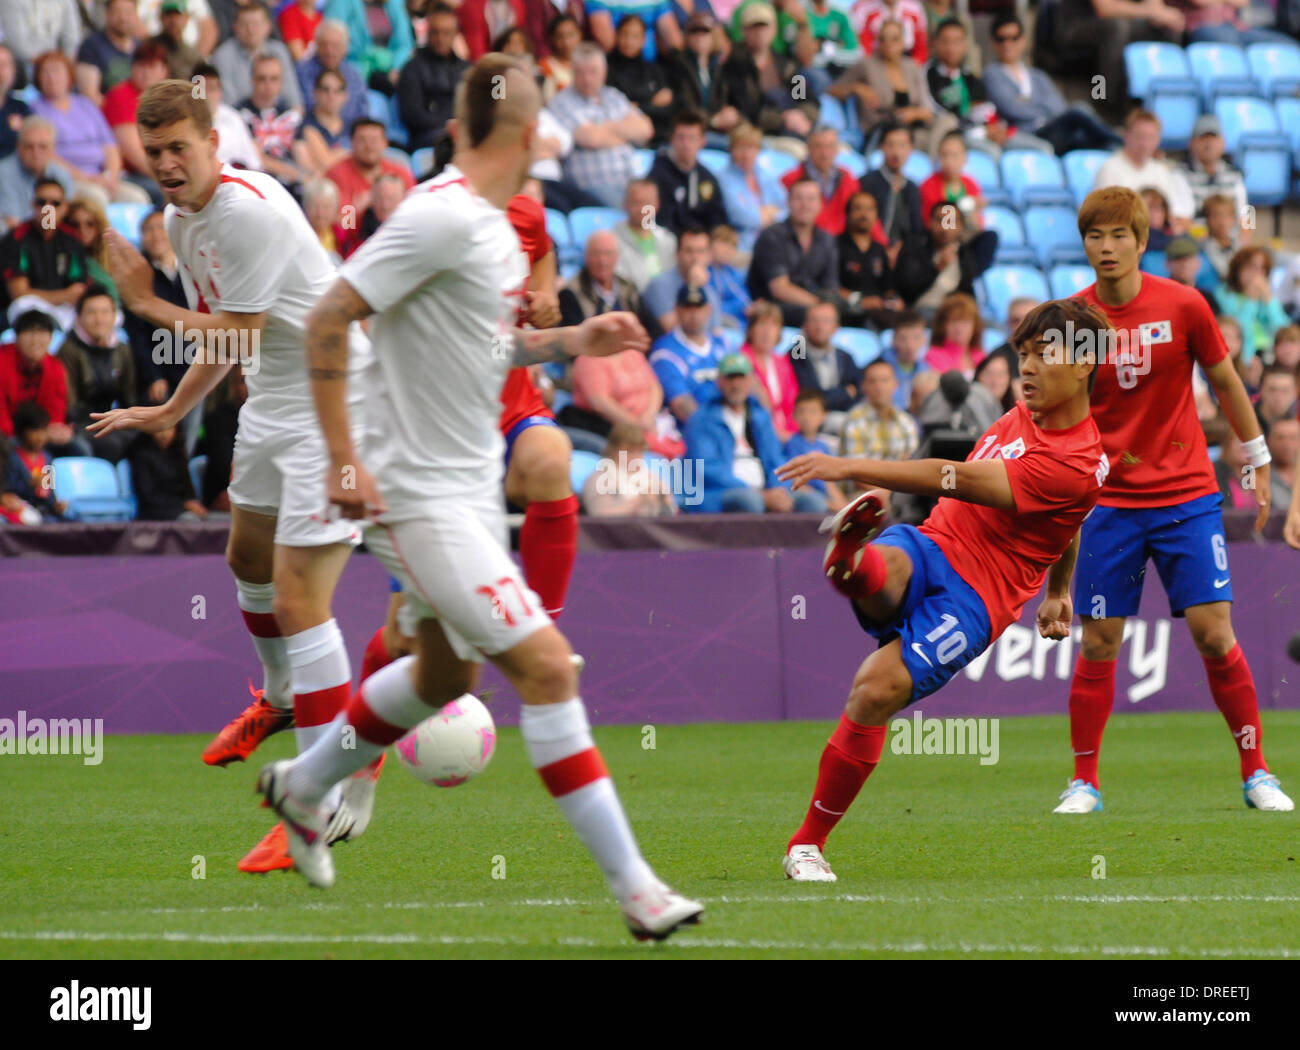 South Korea's Park Chu-young fires a shot at goal   The Olympic Football Men's Preliminary game between Korea and Switzerland held at the City of Coventry Stadium  Coventry, England - 29.07.12 Stock Photo